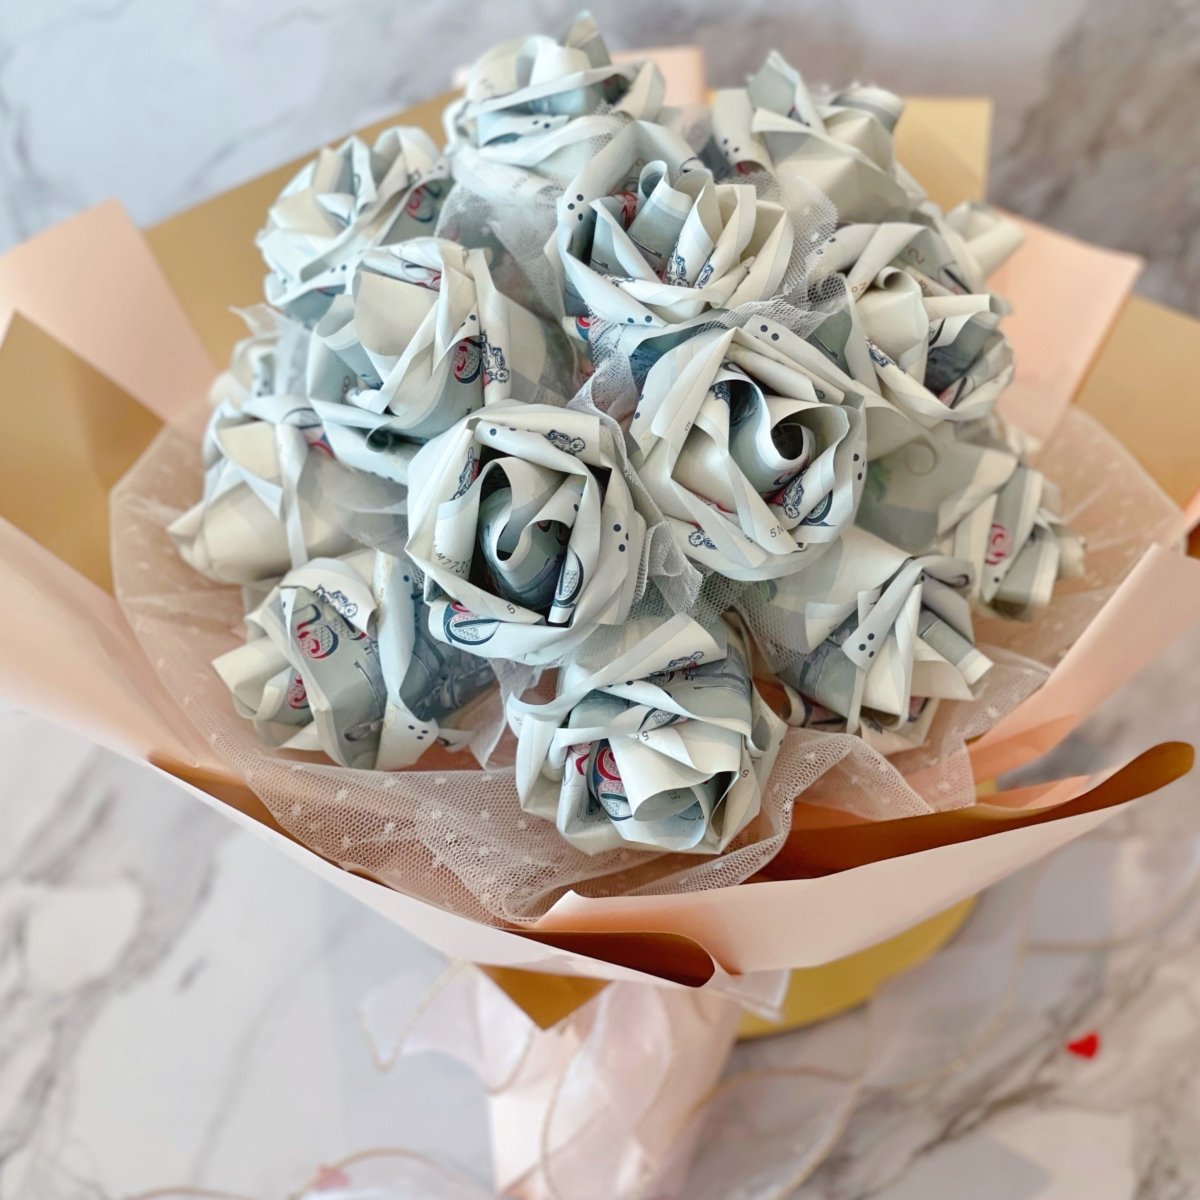 Rose Money Flower Bouquet Gift for Her ( Single Stalk)| Origami Rose made  from Real Cash (Bank Notes not inclusive (3 day pre-order)